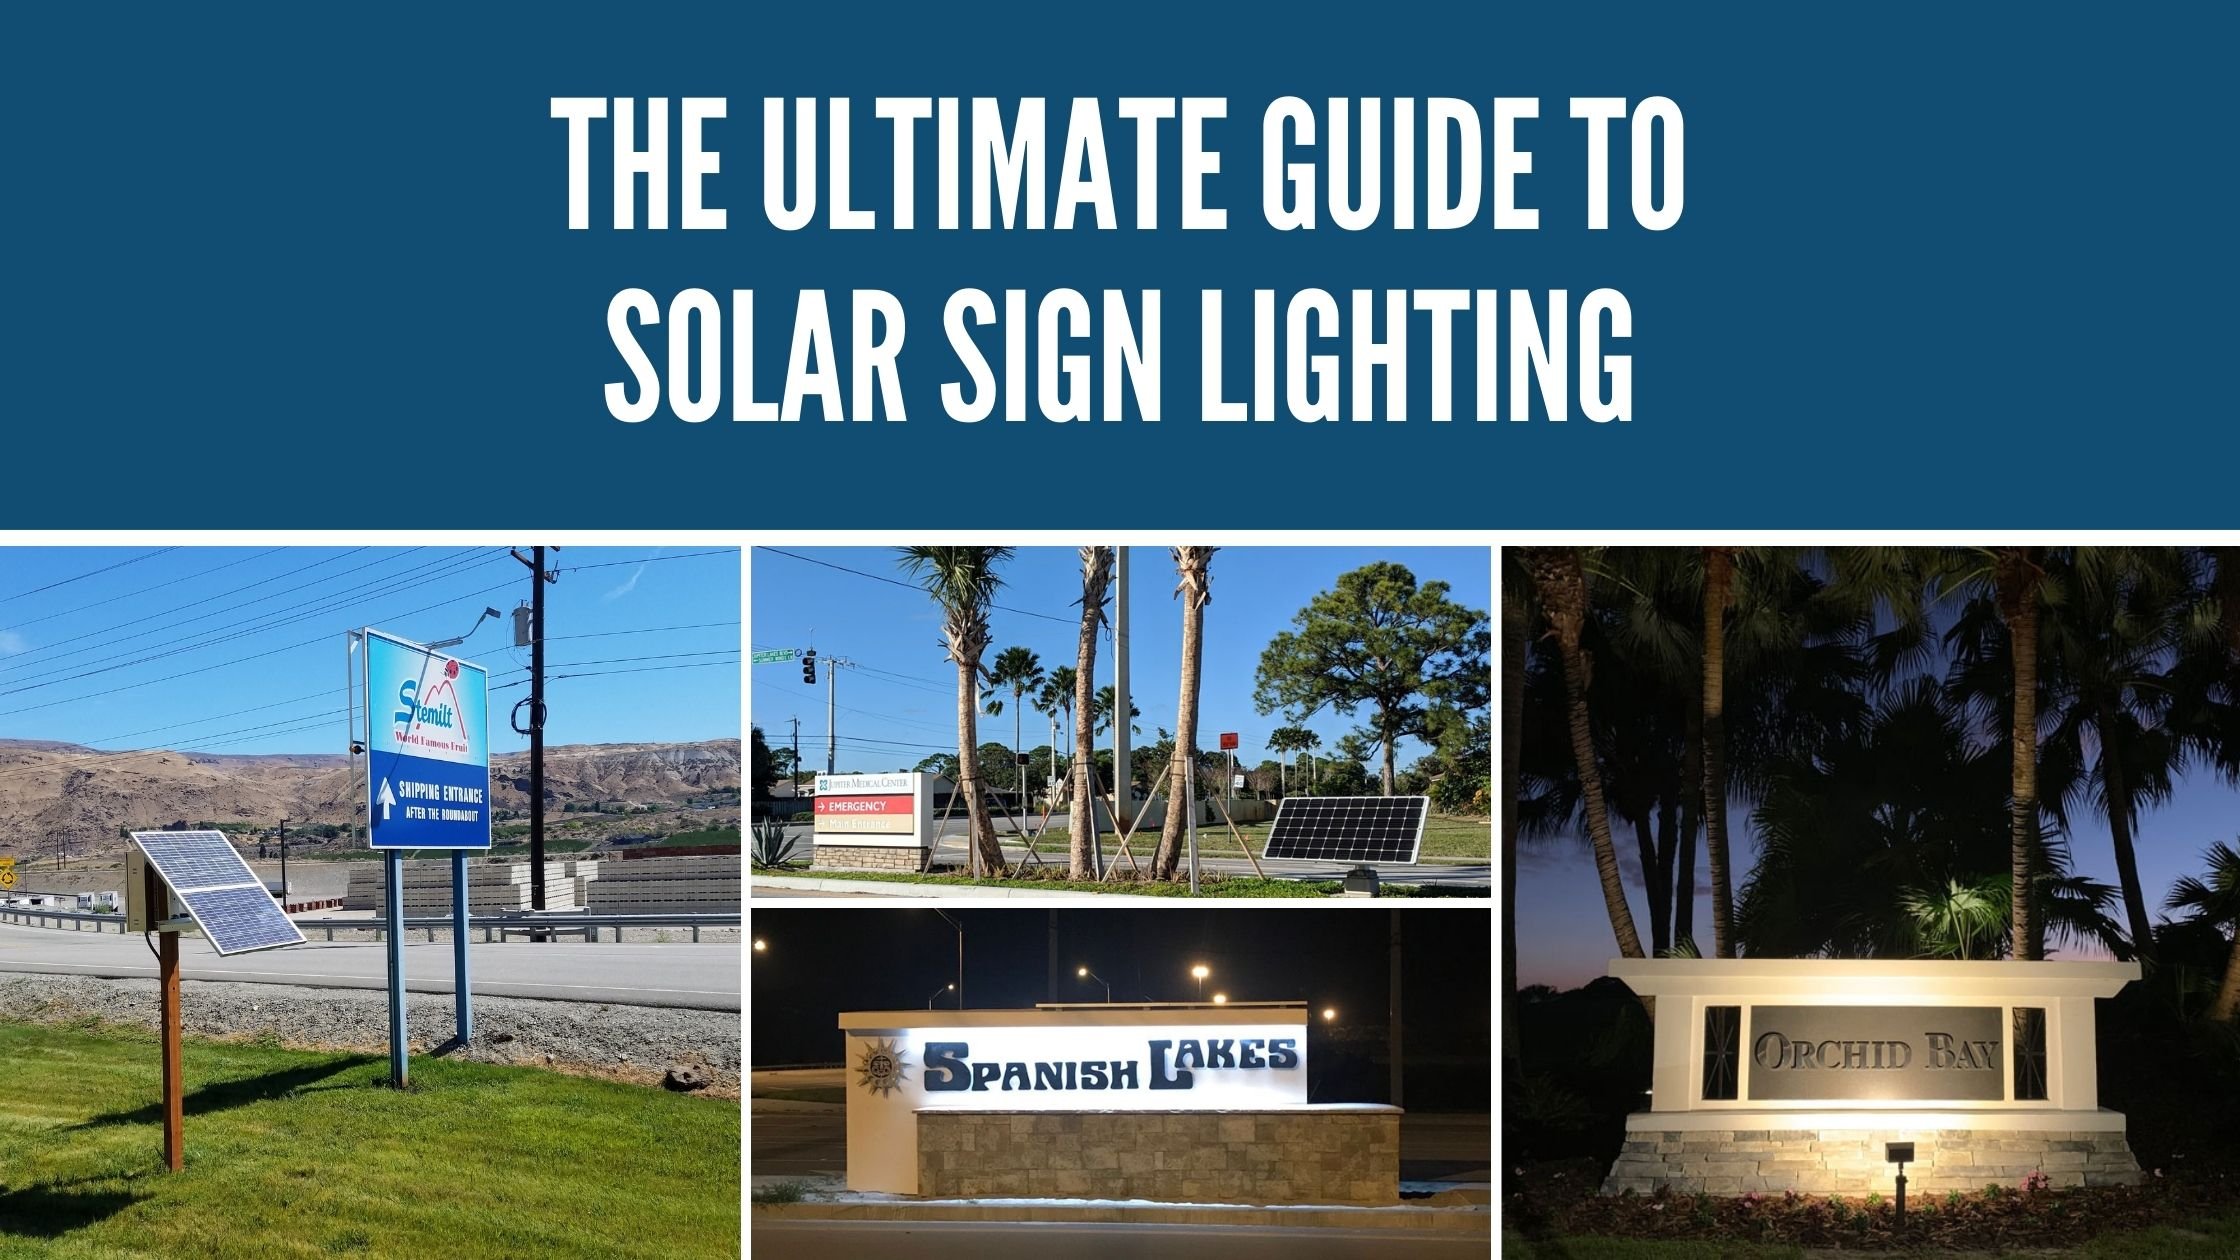 The Ultimate Guide to Solar Sign Lighting